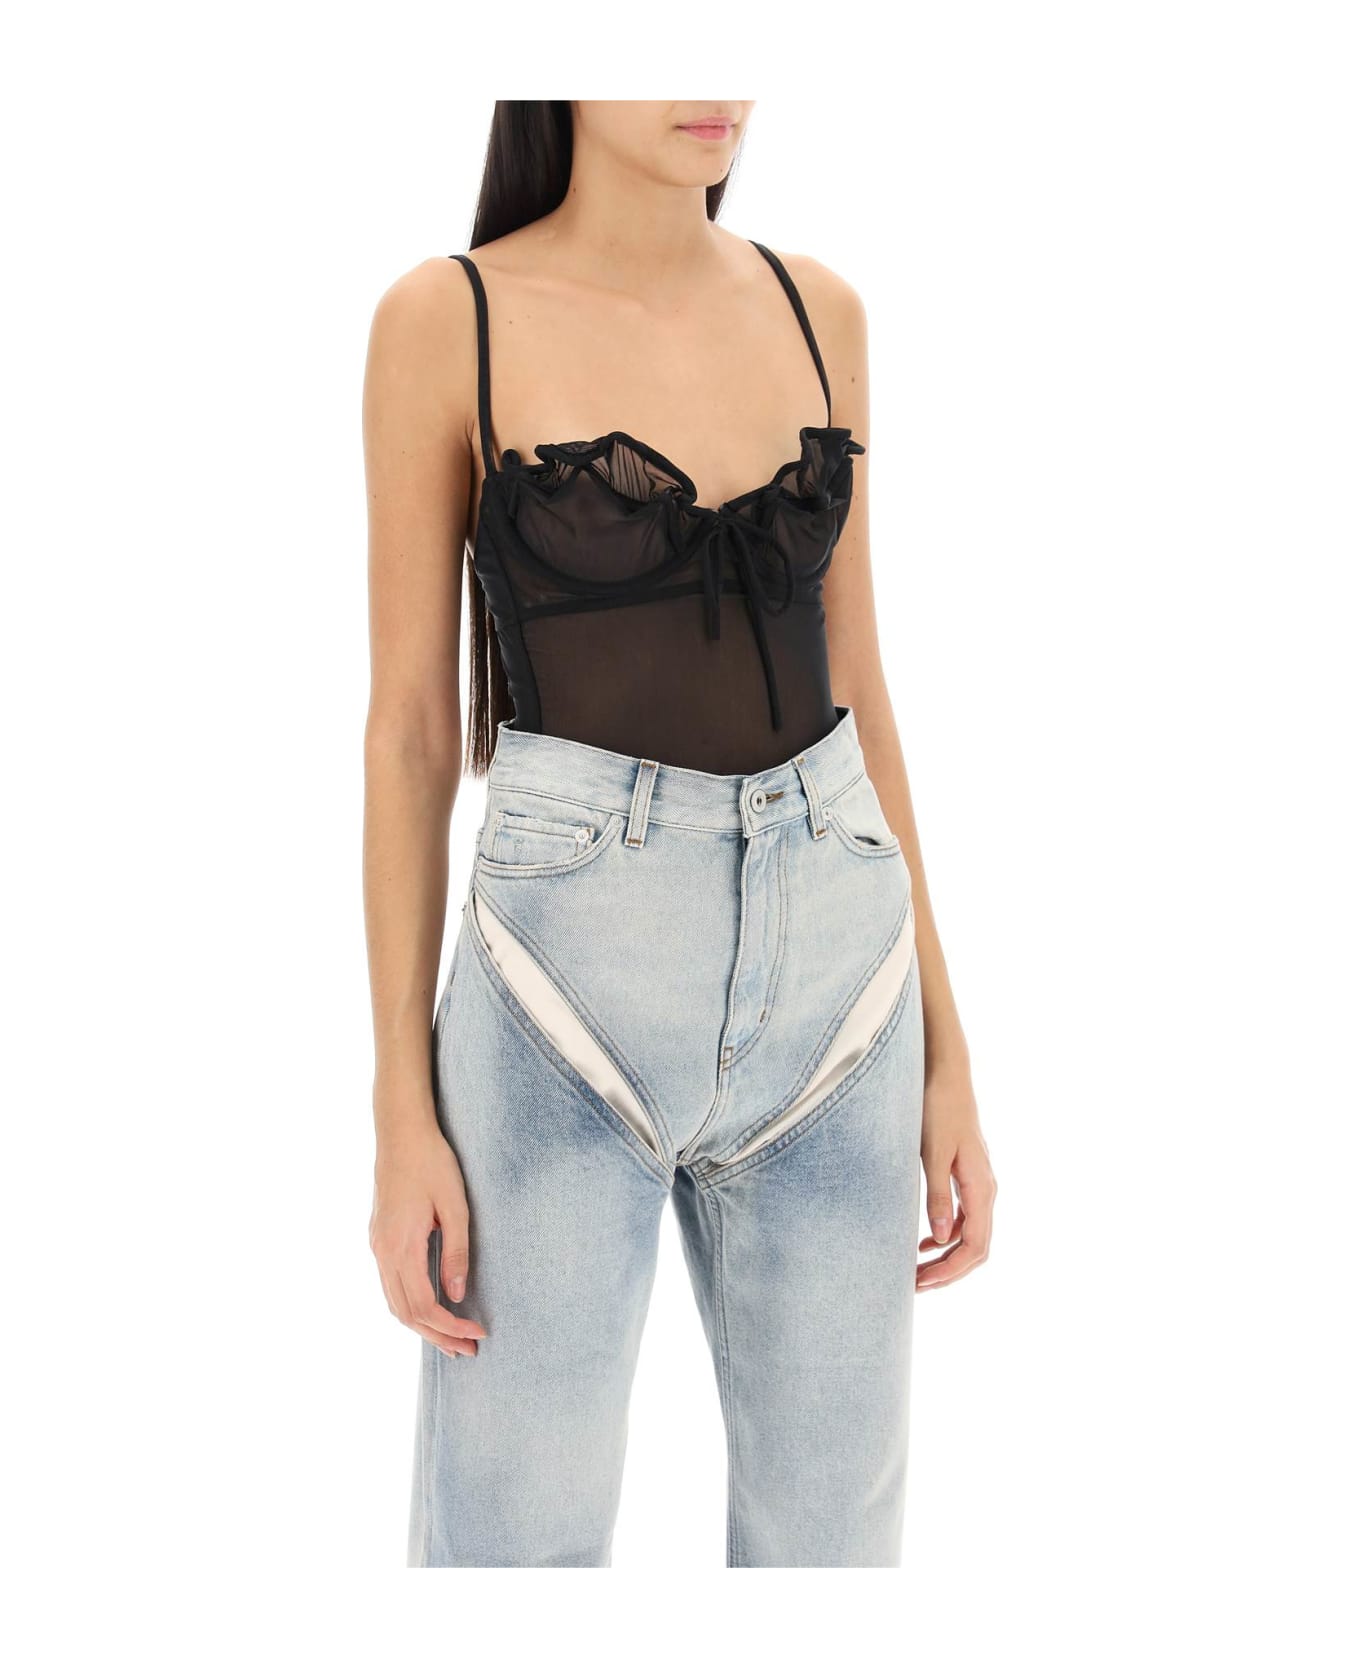 Y/Project Wired Mesh Bodysuit - Black